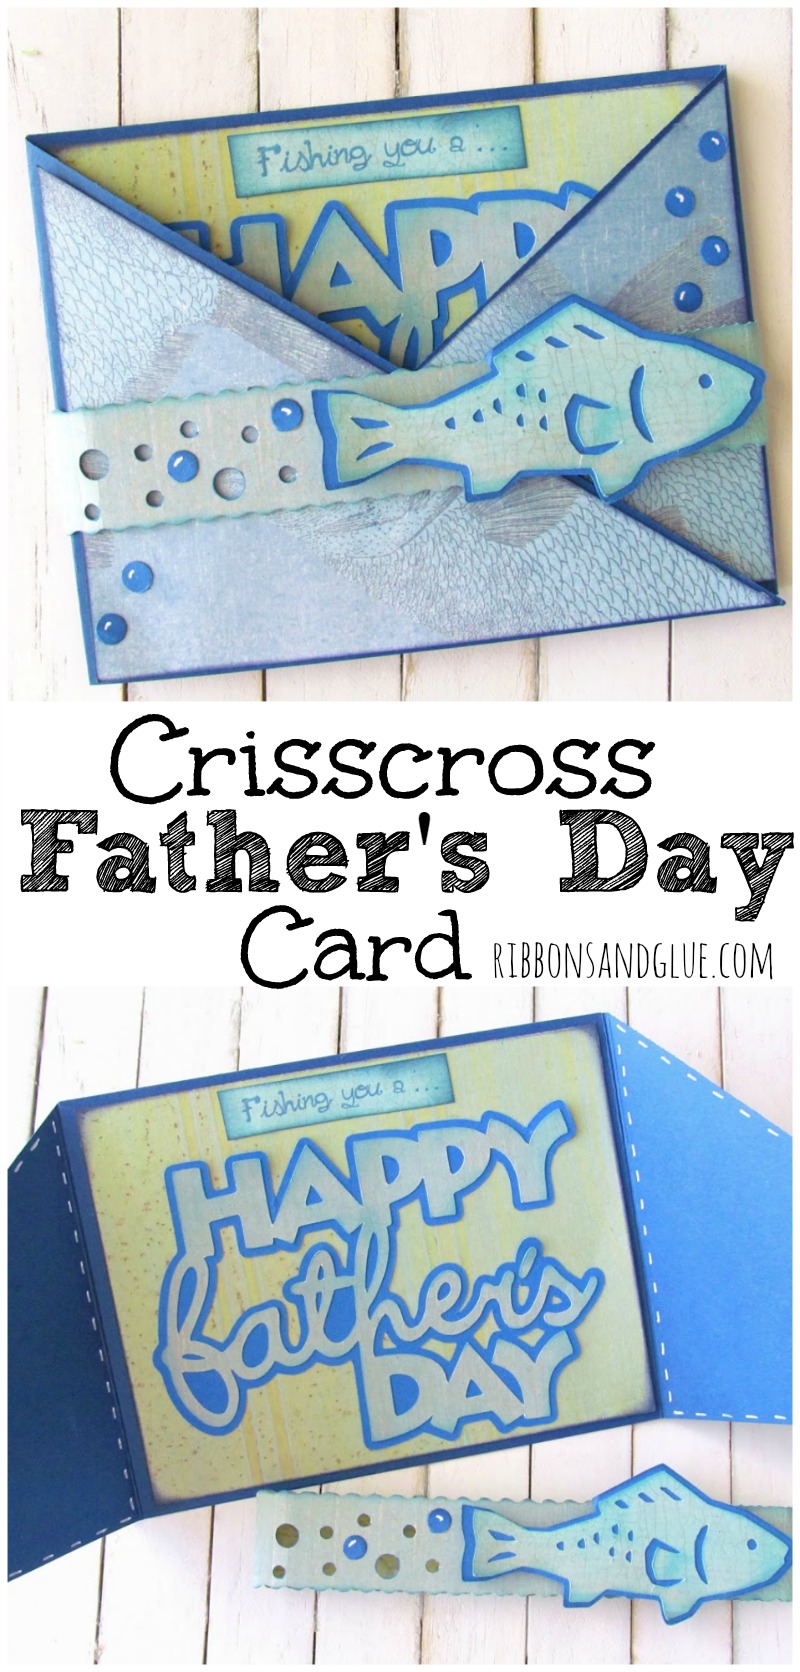 Give dad a unique crisscross fish themed Father's Day card perfect for any fish loving dad.  